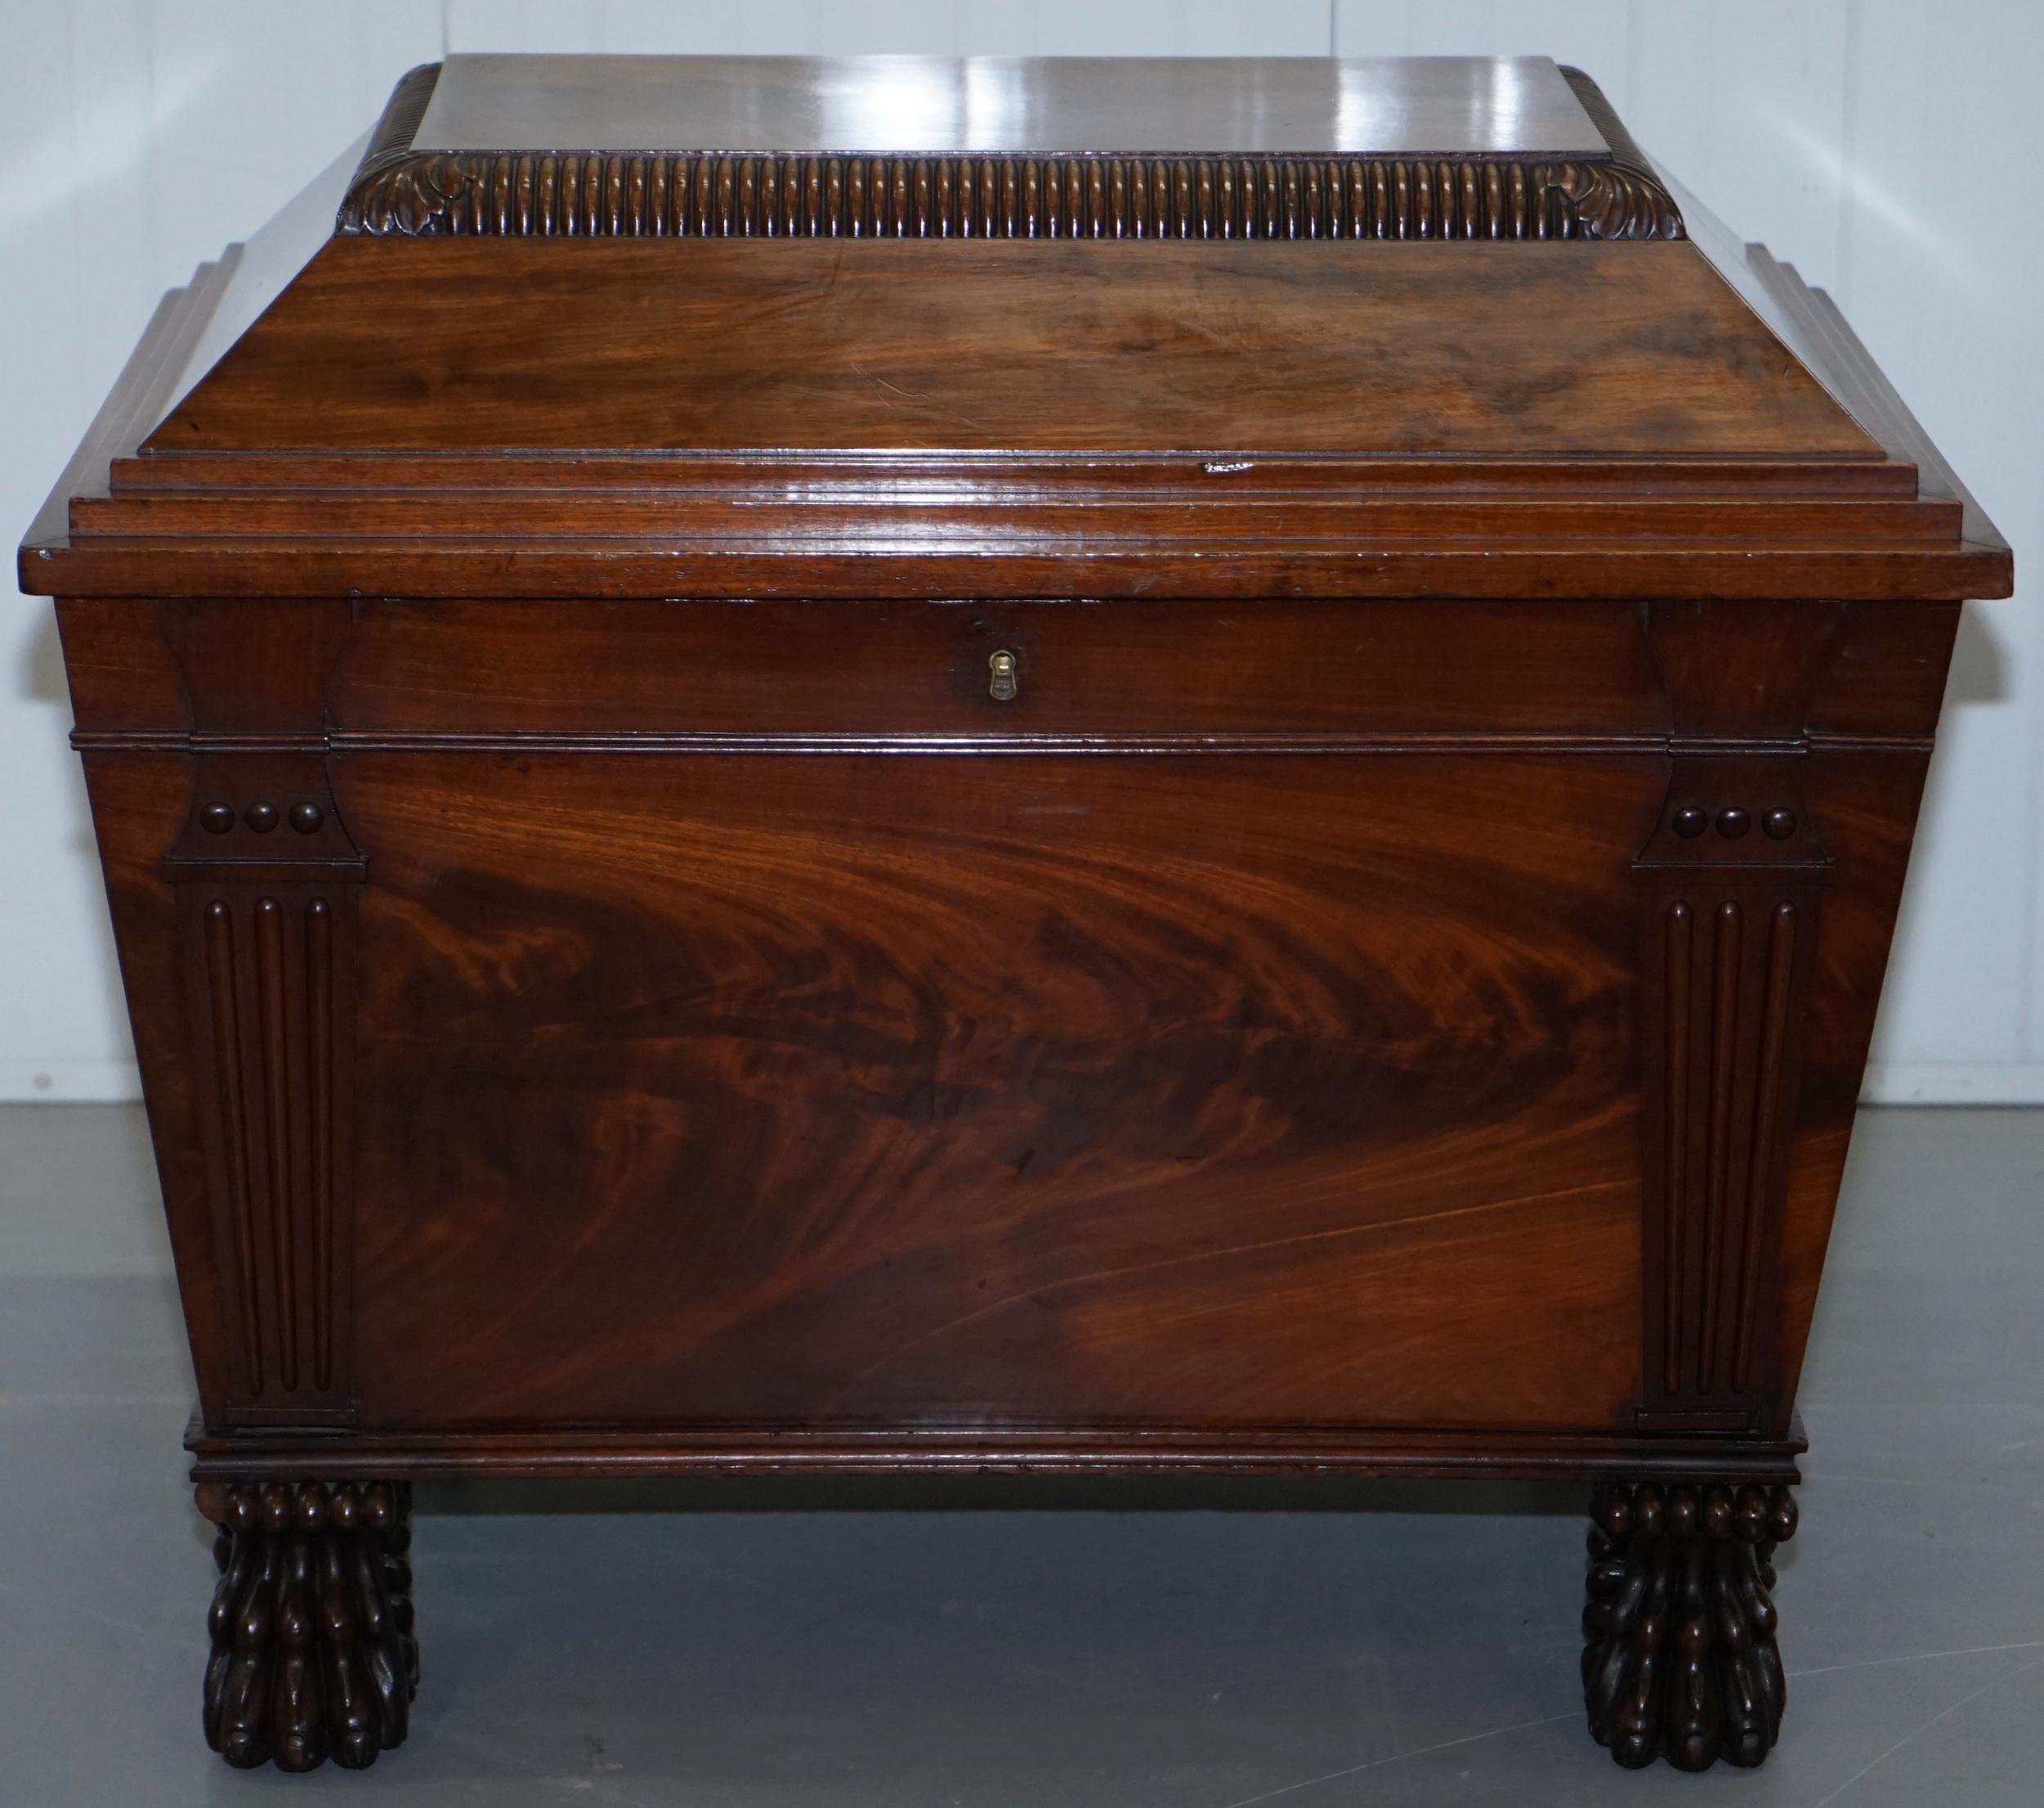 Hand-Crafted Sir Anderson Army General Georgian Irish 1810 Hardwood Wine Cooler Cellarette For Sale